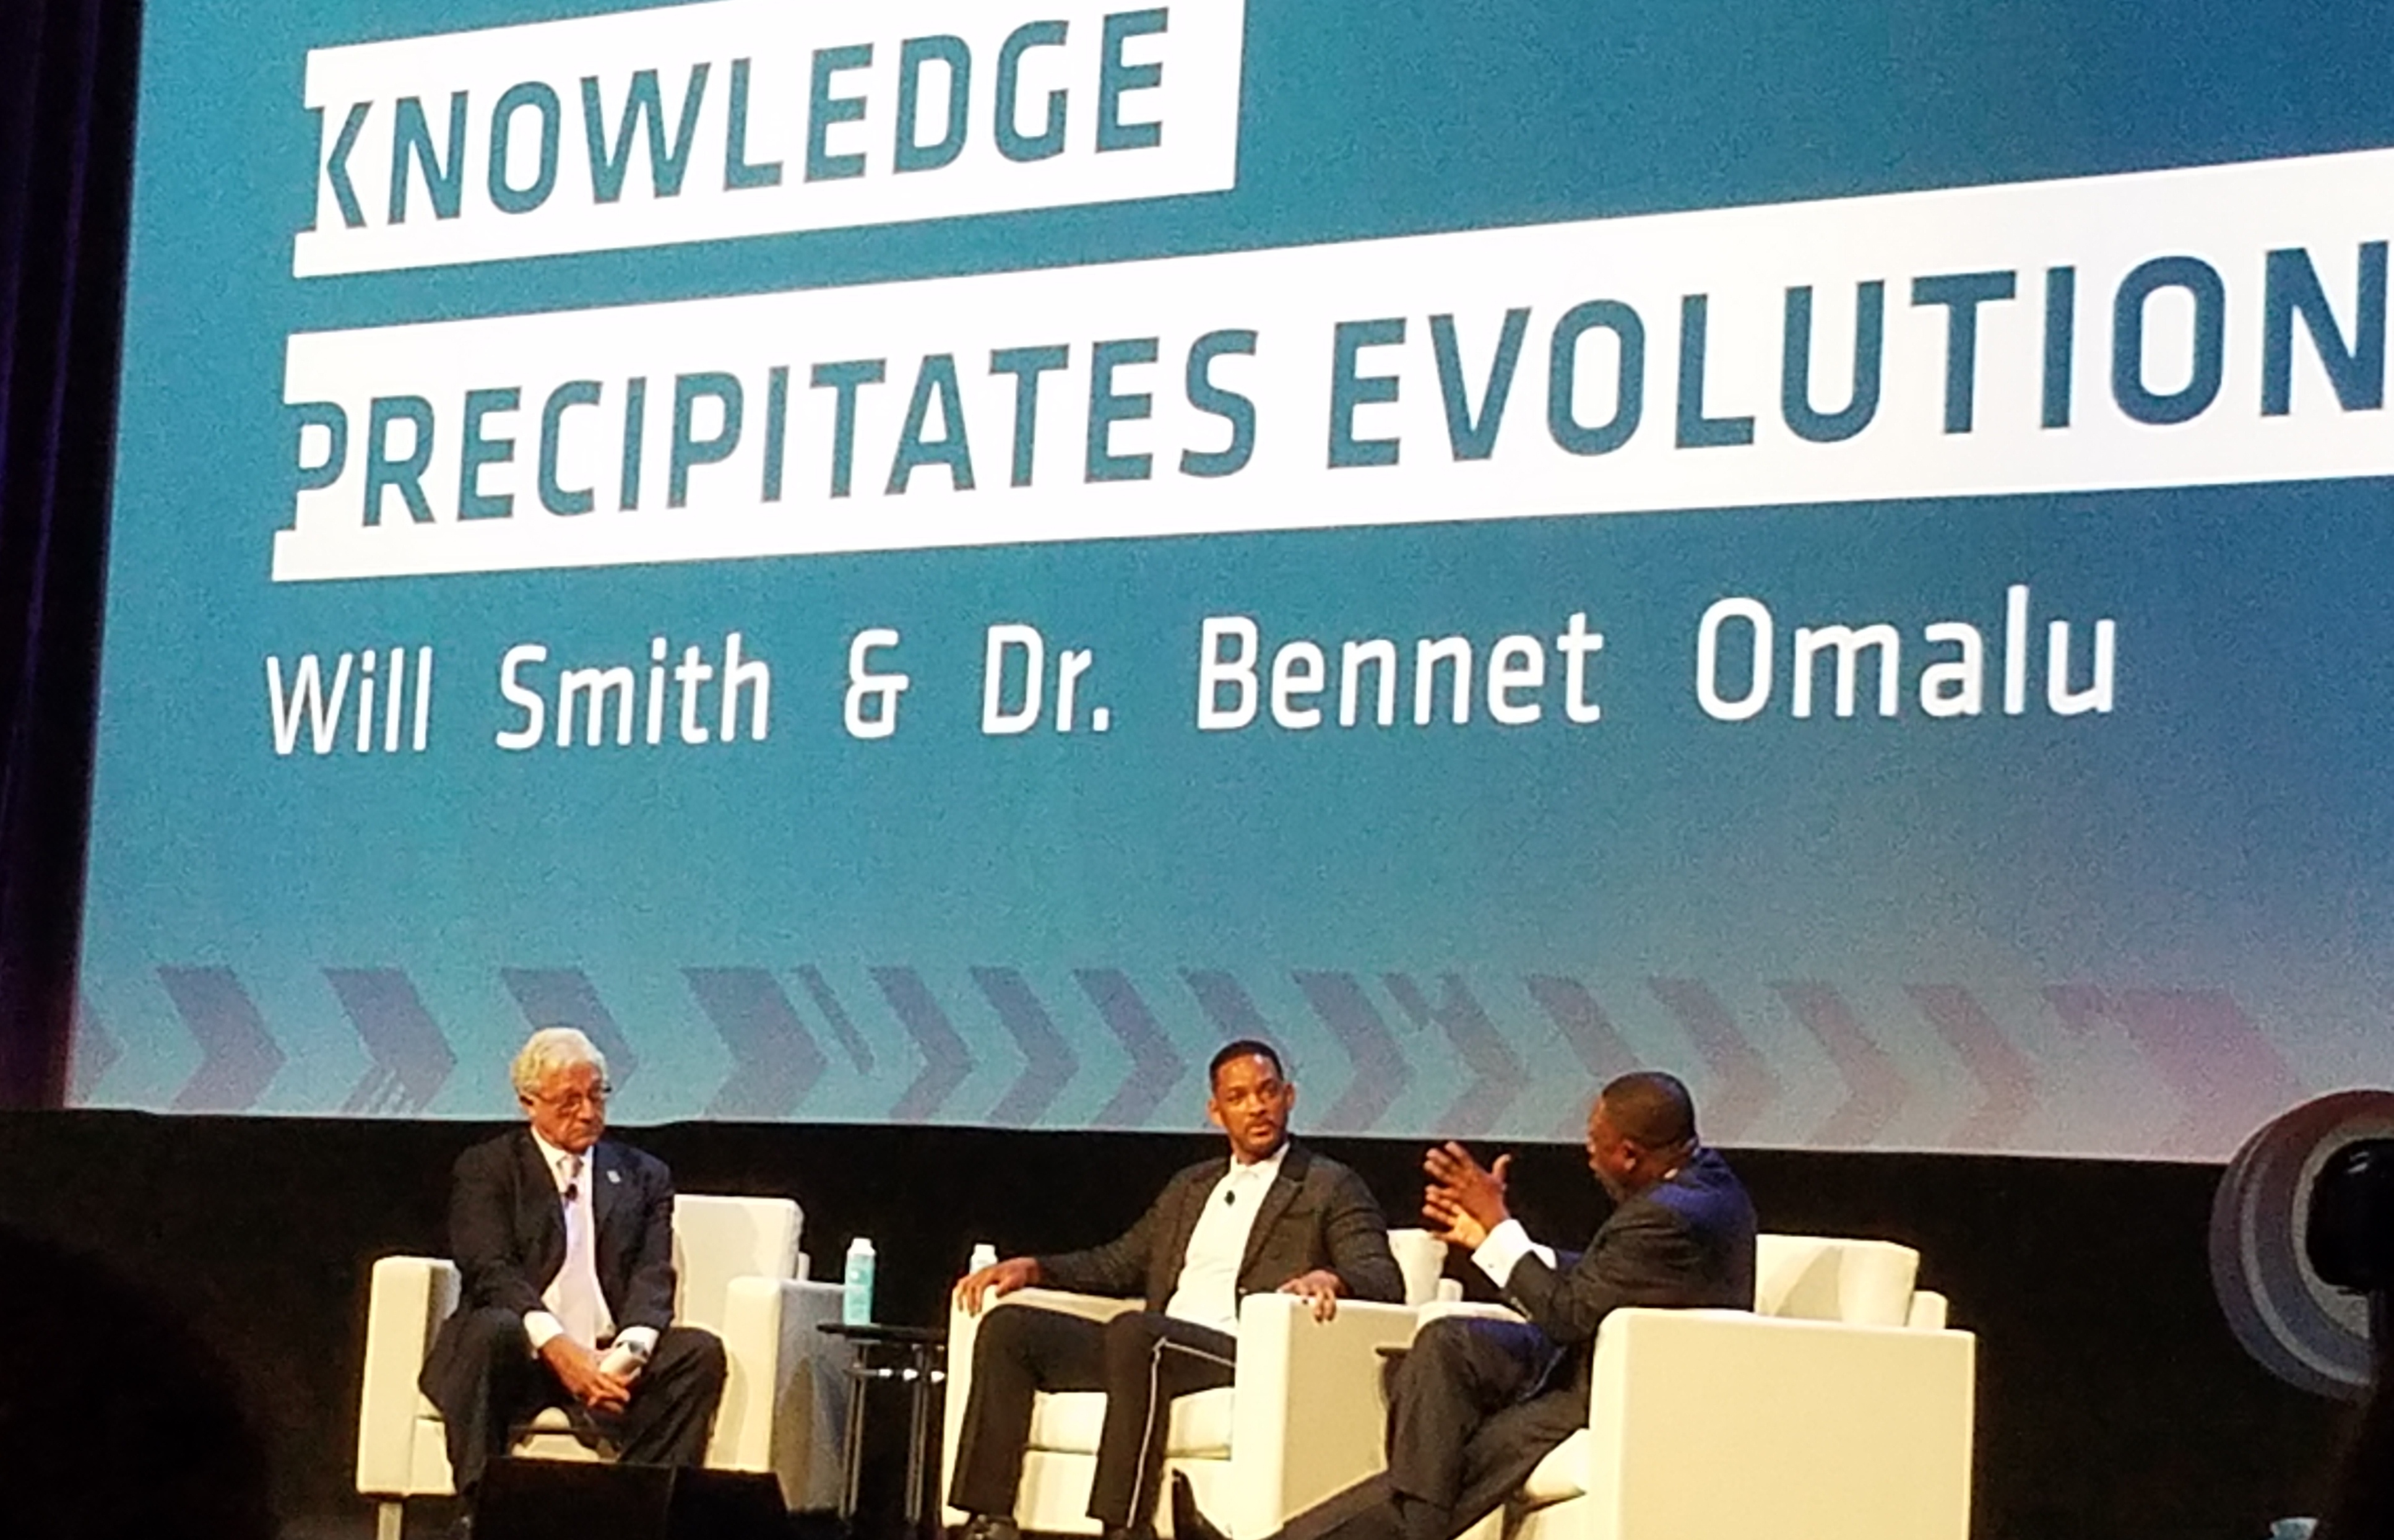 What Dr Bennet Omalu and Will Smith have in common?